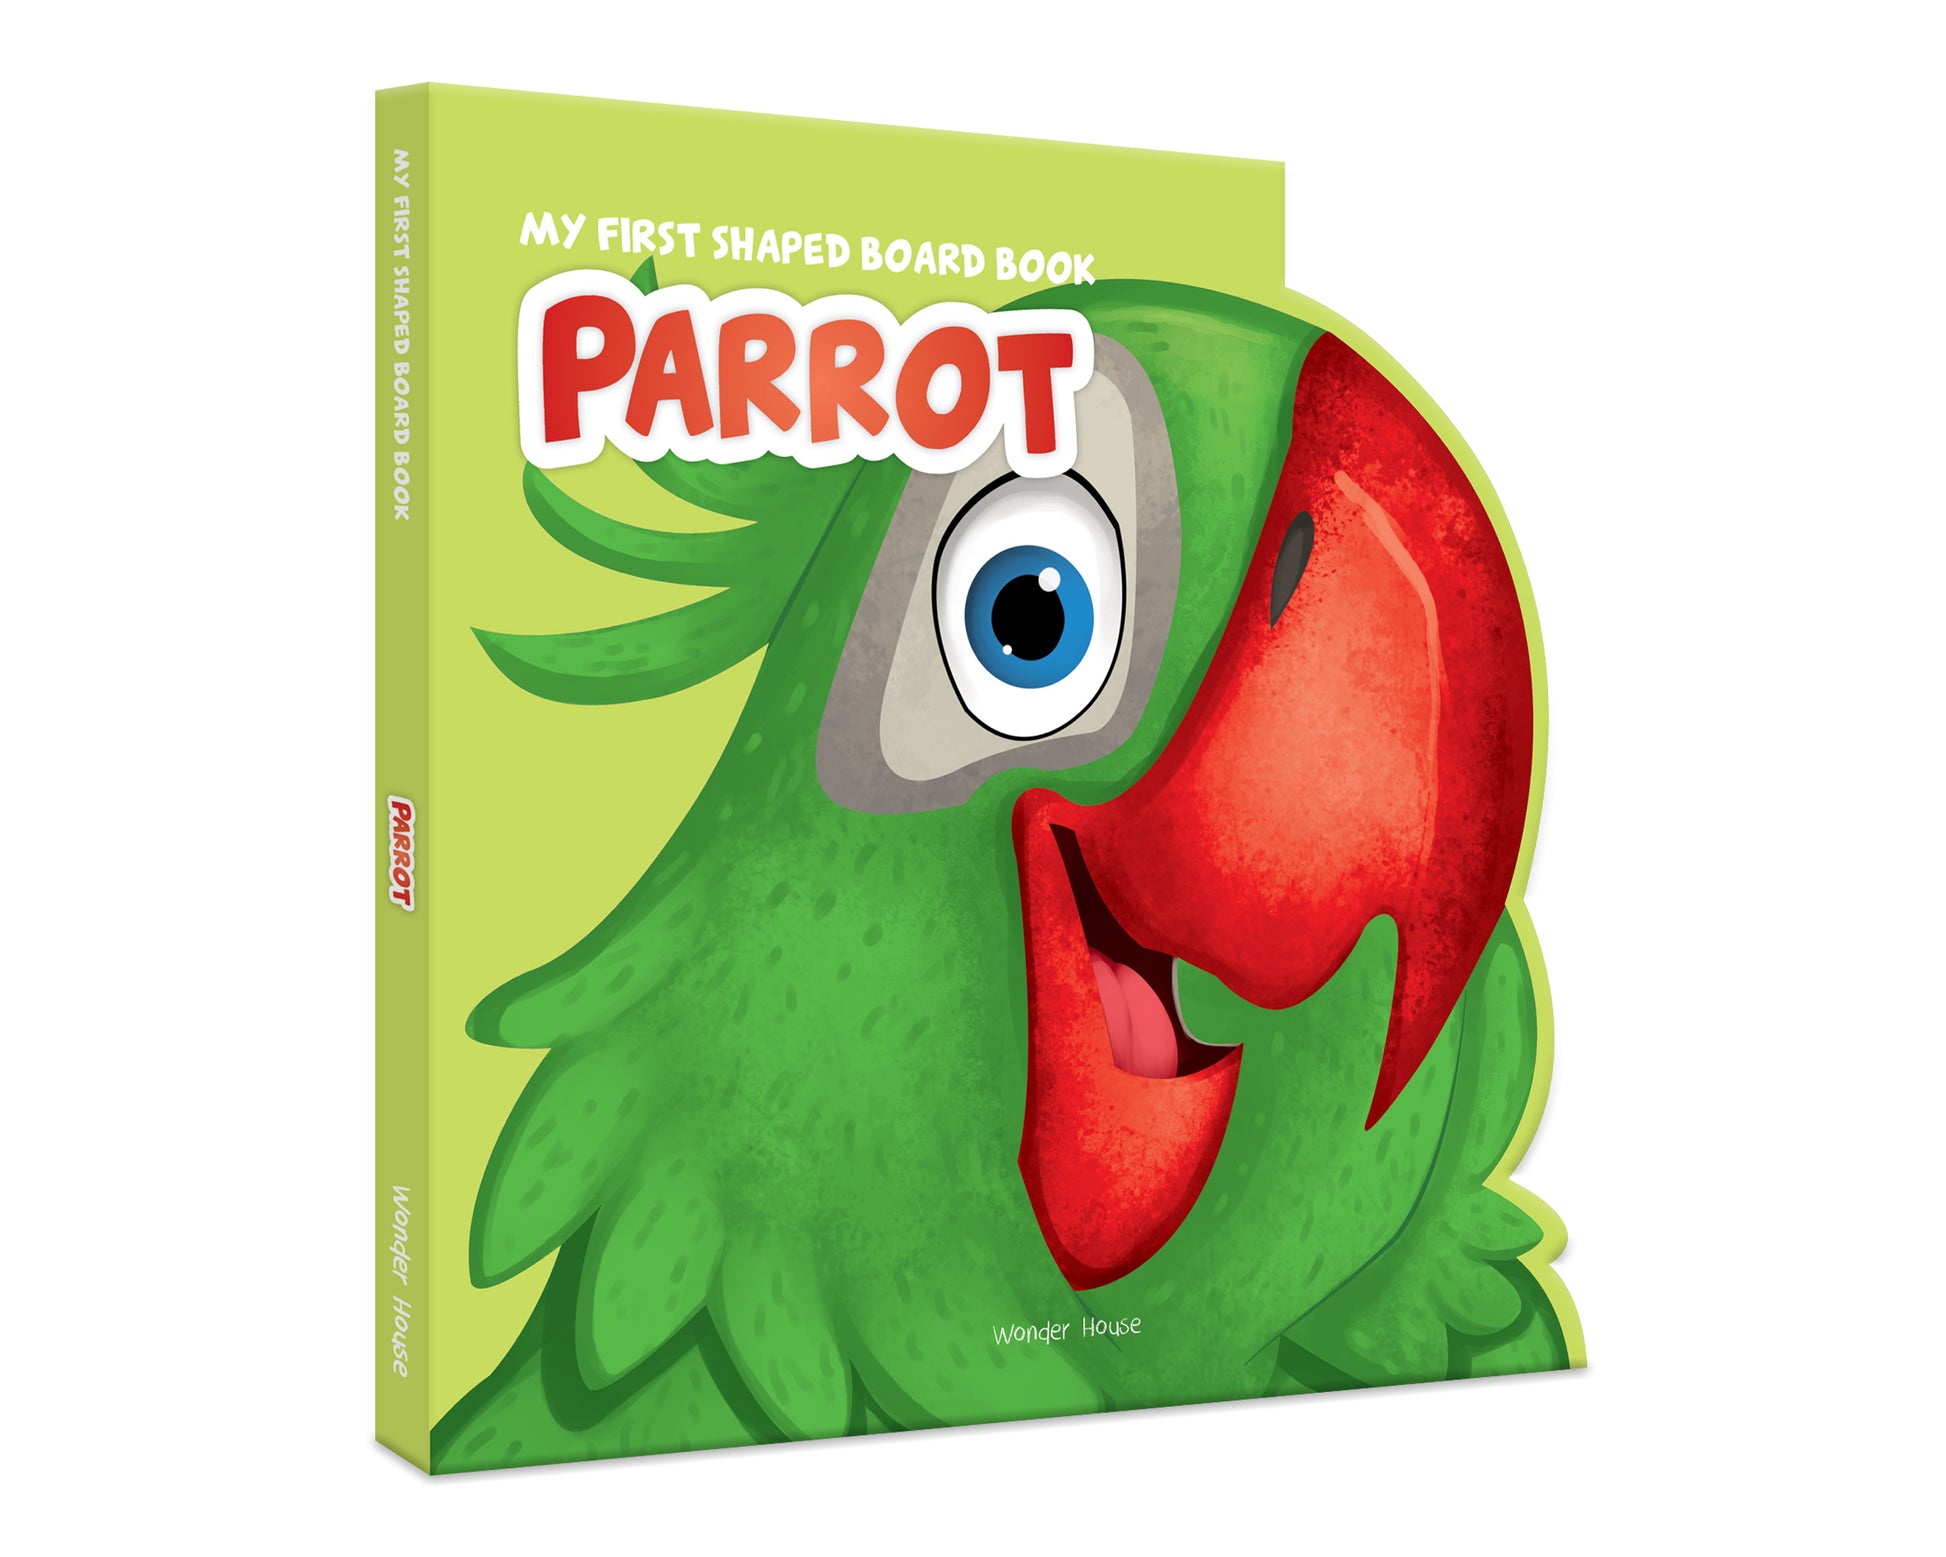 My First Shaped Board Book: Illustrated Parrot - Bird Picture Book for Kids Age 2+ Board book